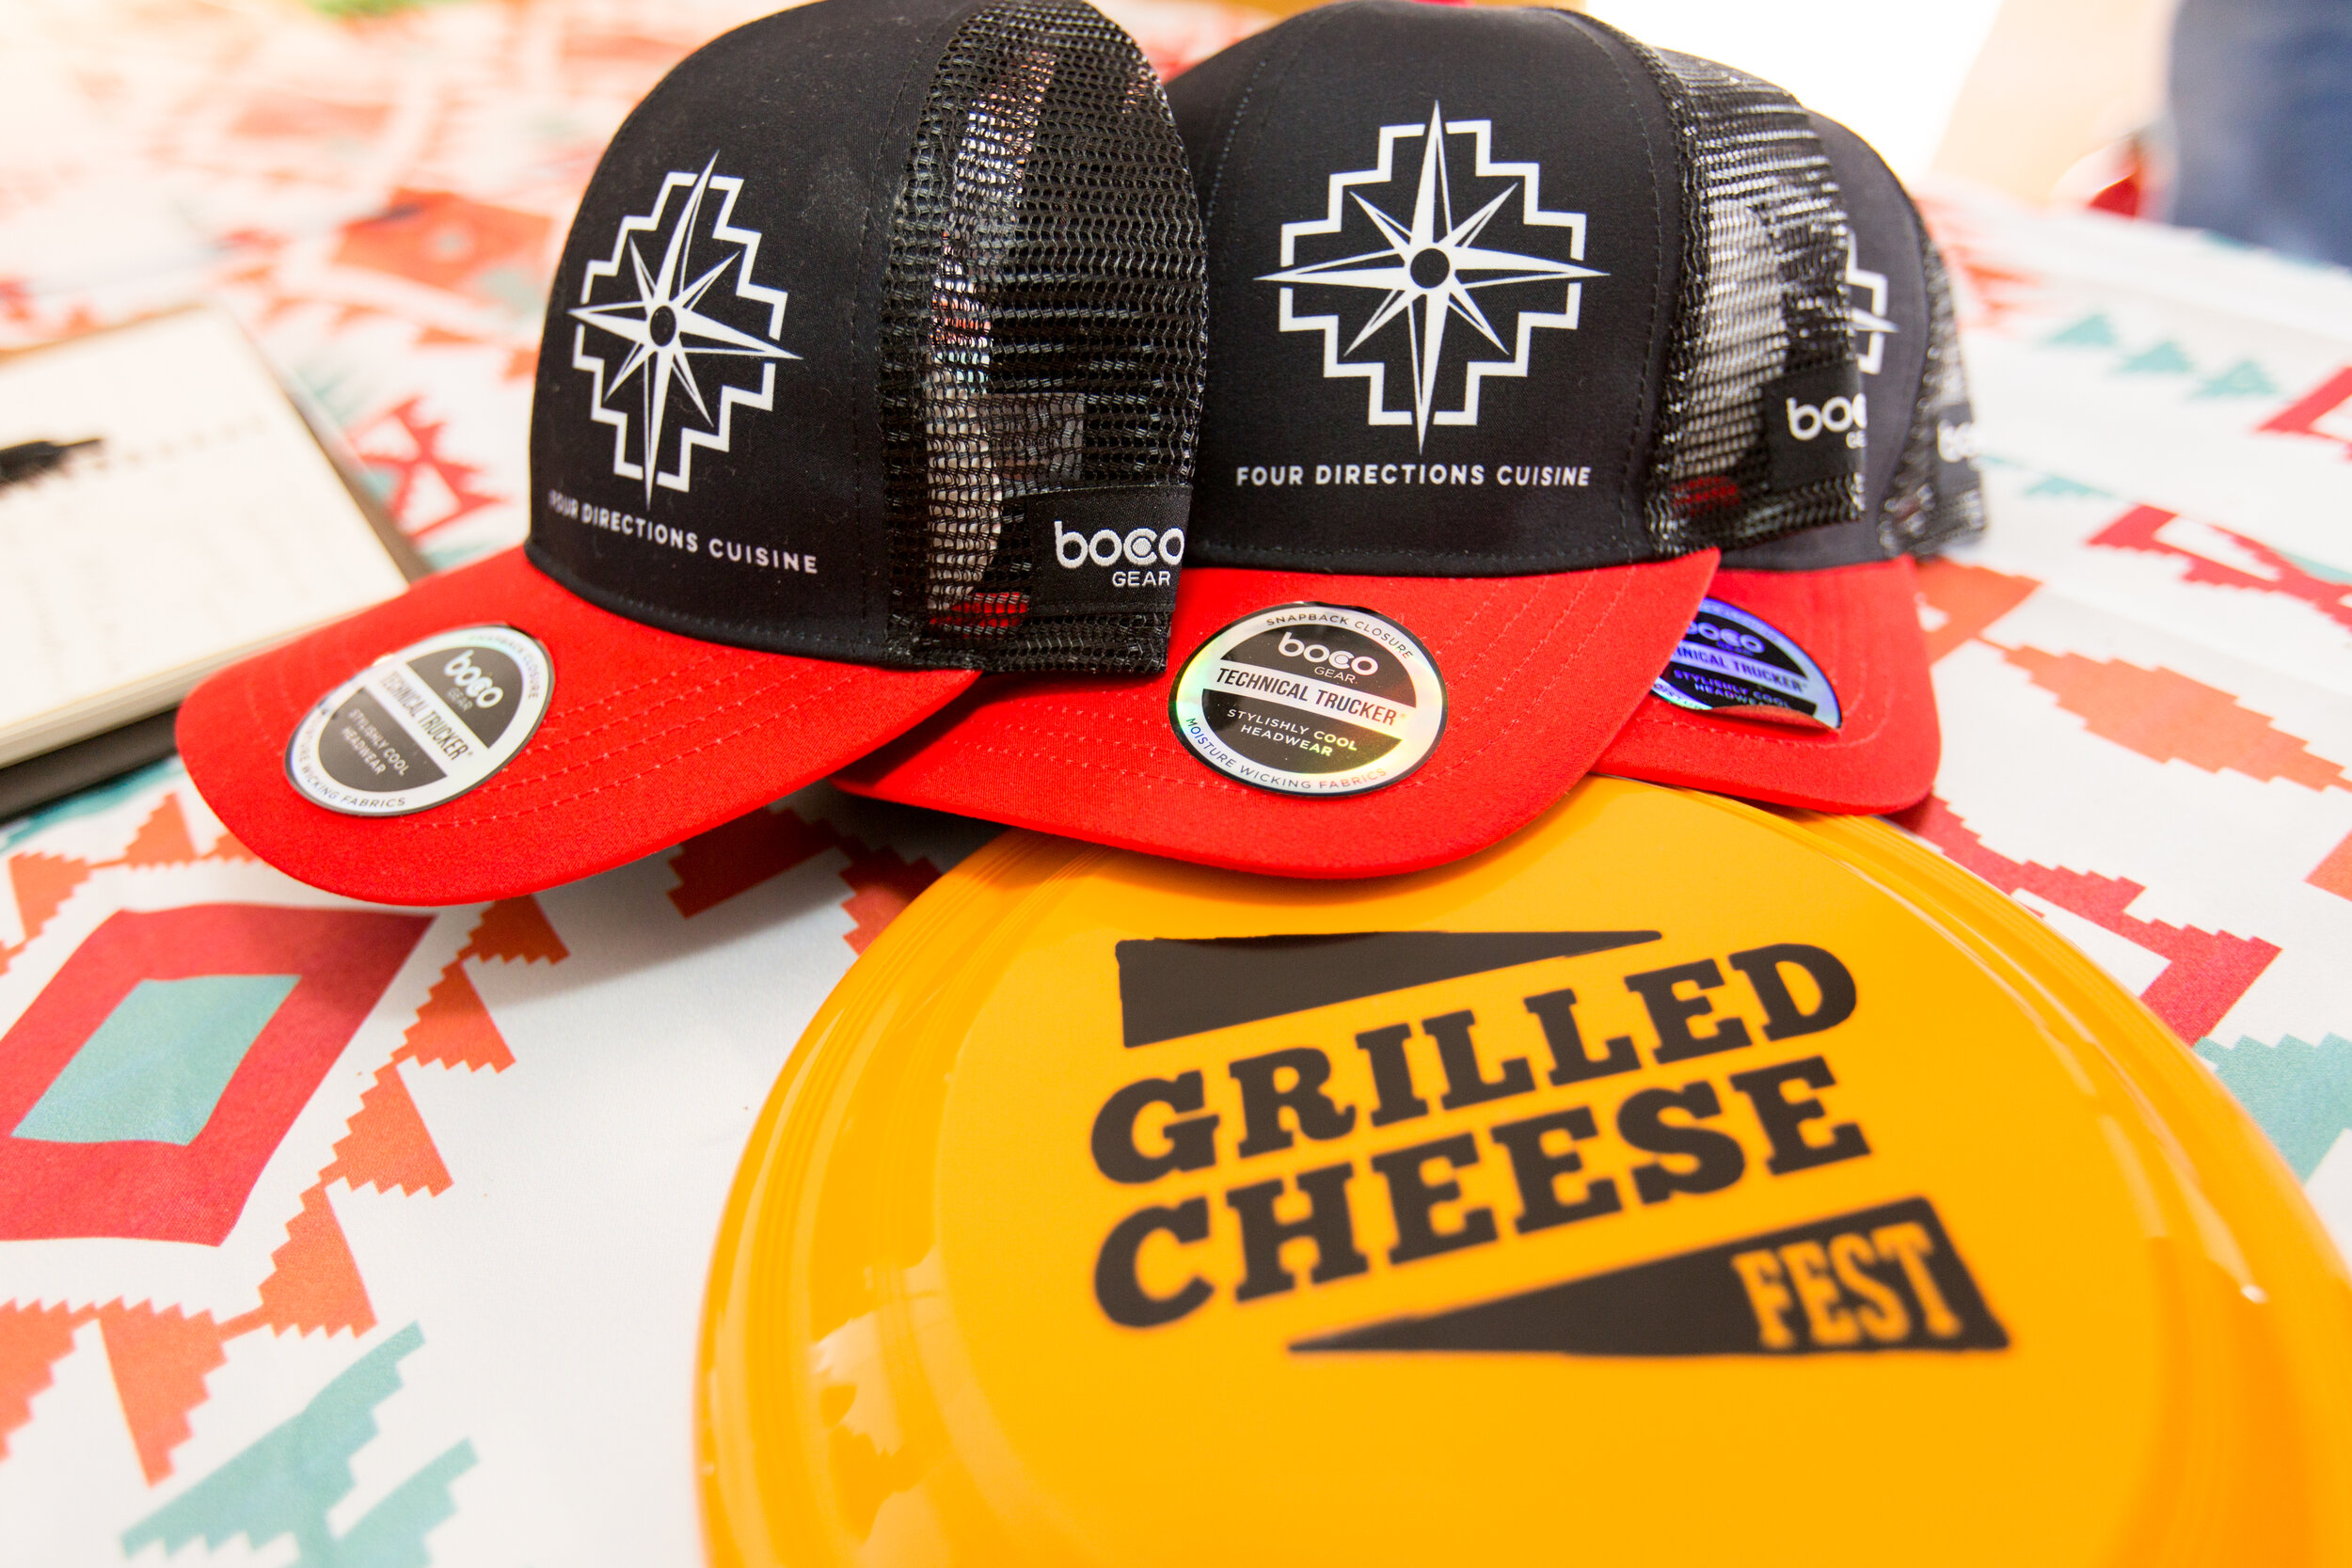 Denver Grilled Cheese & Beer Festival — Grilled Cheese and Beer Fest